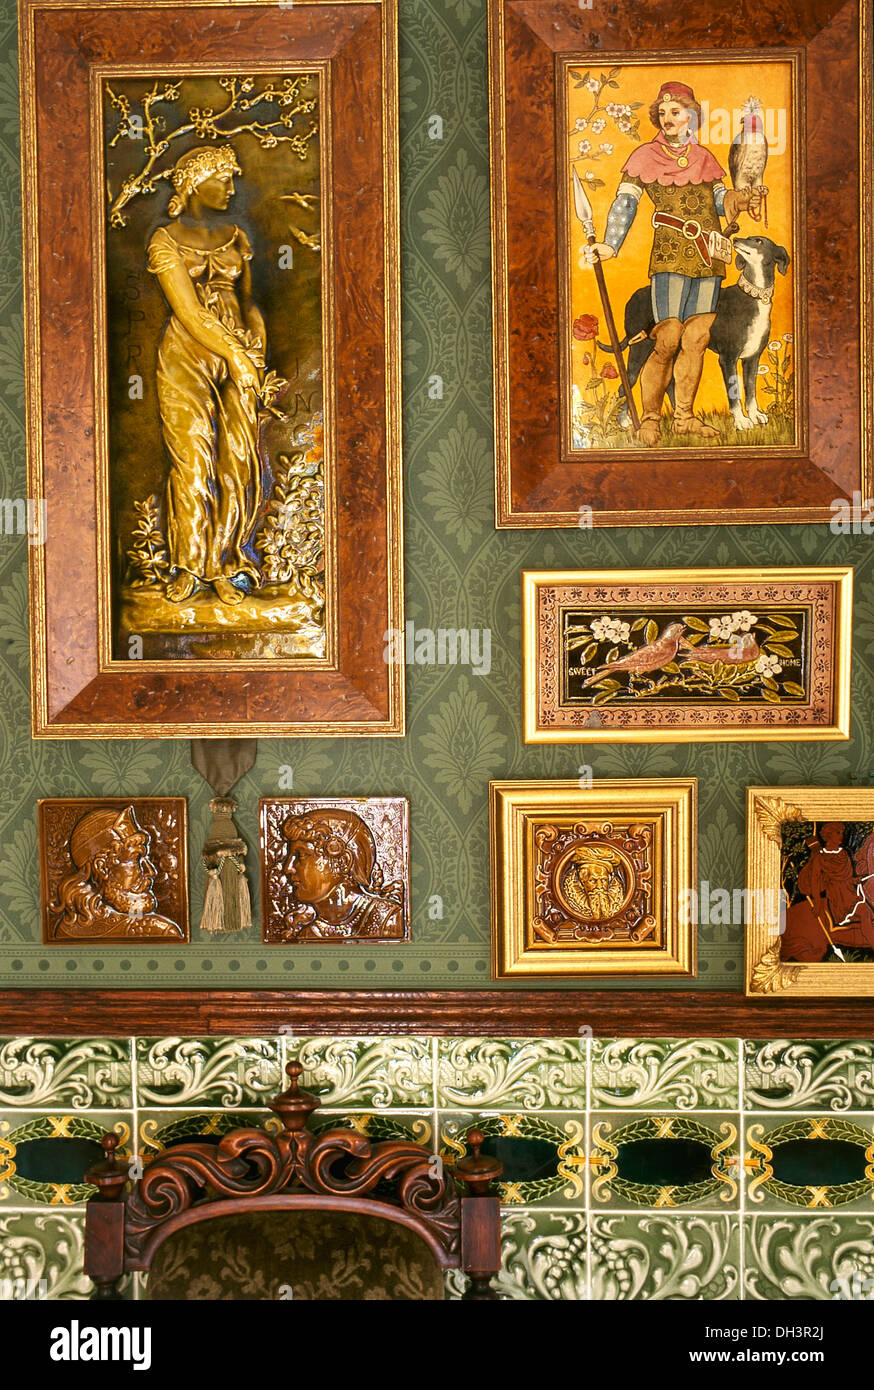 Close-up Arts & Crafts pictures above on green pattern wallpaper above decorative ceramic tiled dado Stock Photo